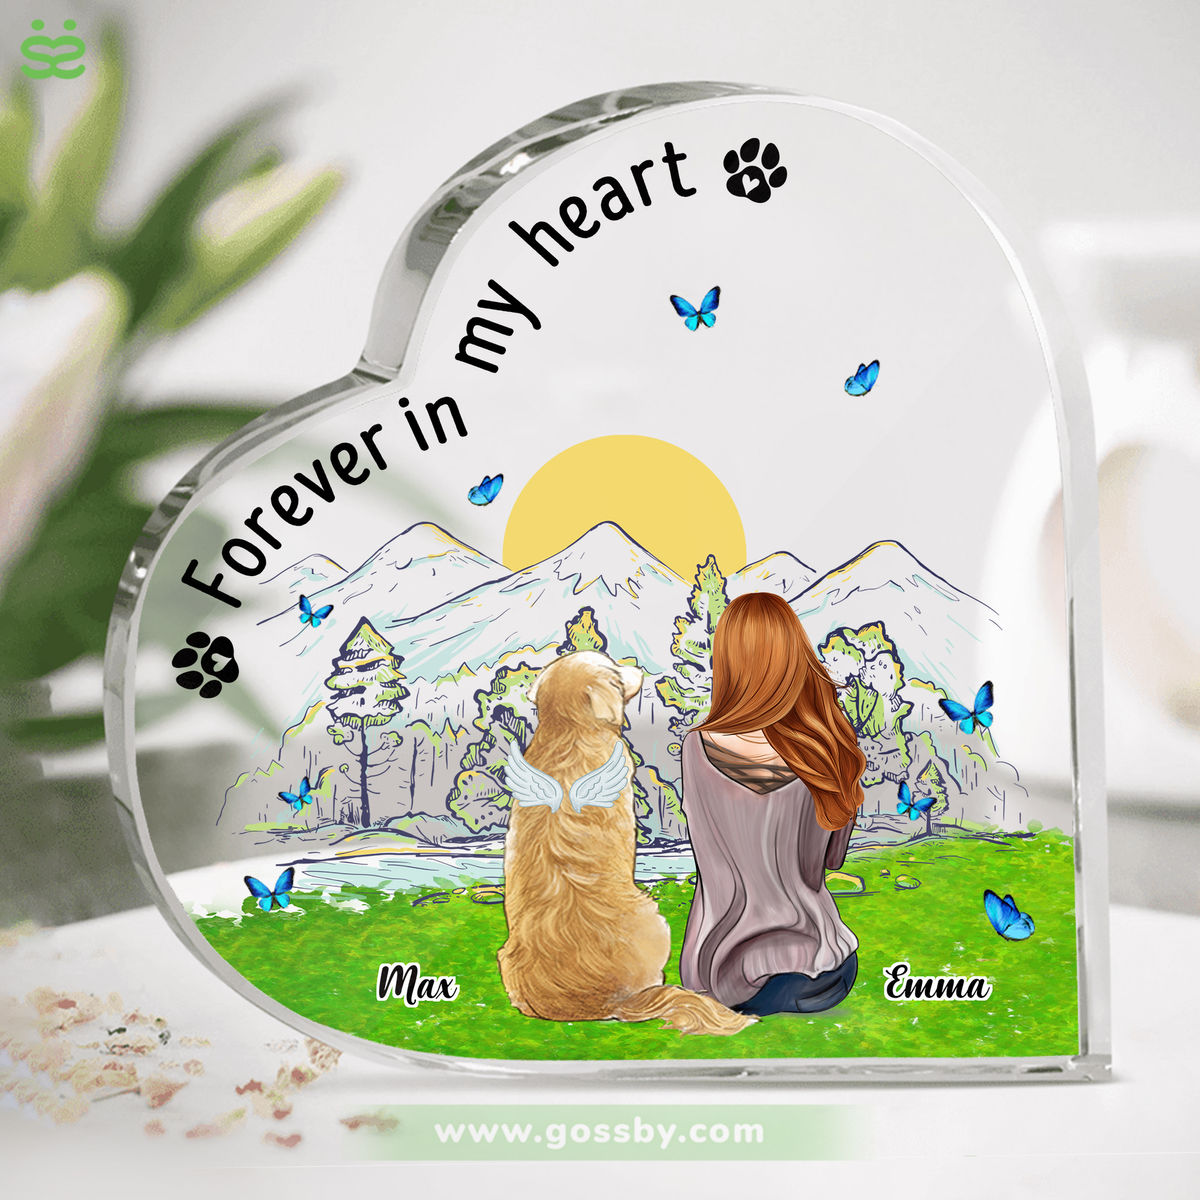 Heart Acrylic Transparent Plaque - Girl and Her Dog - Personalized Heart Shaped Acrylic Plaque - The Moment Your Heart Stopped Mine Changed Forever_2